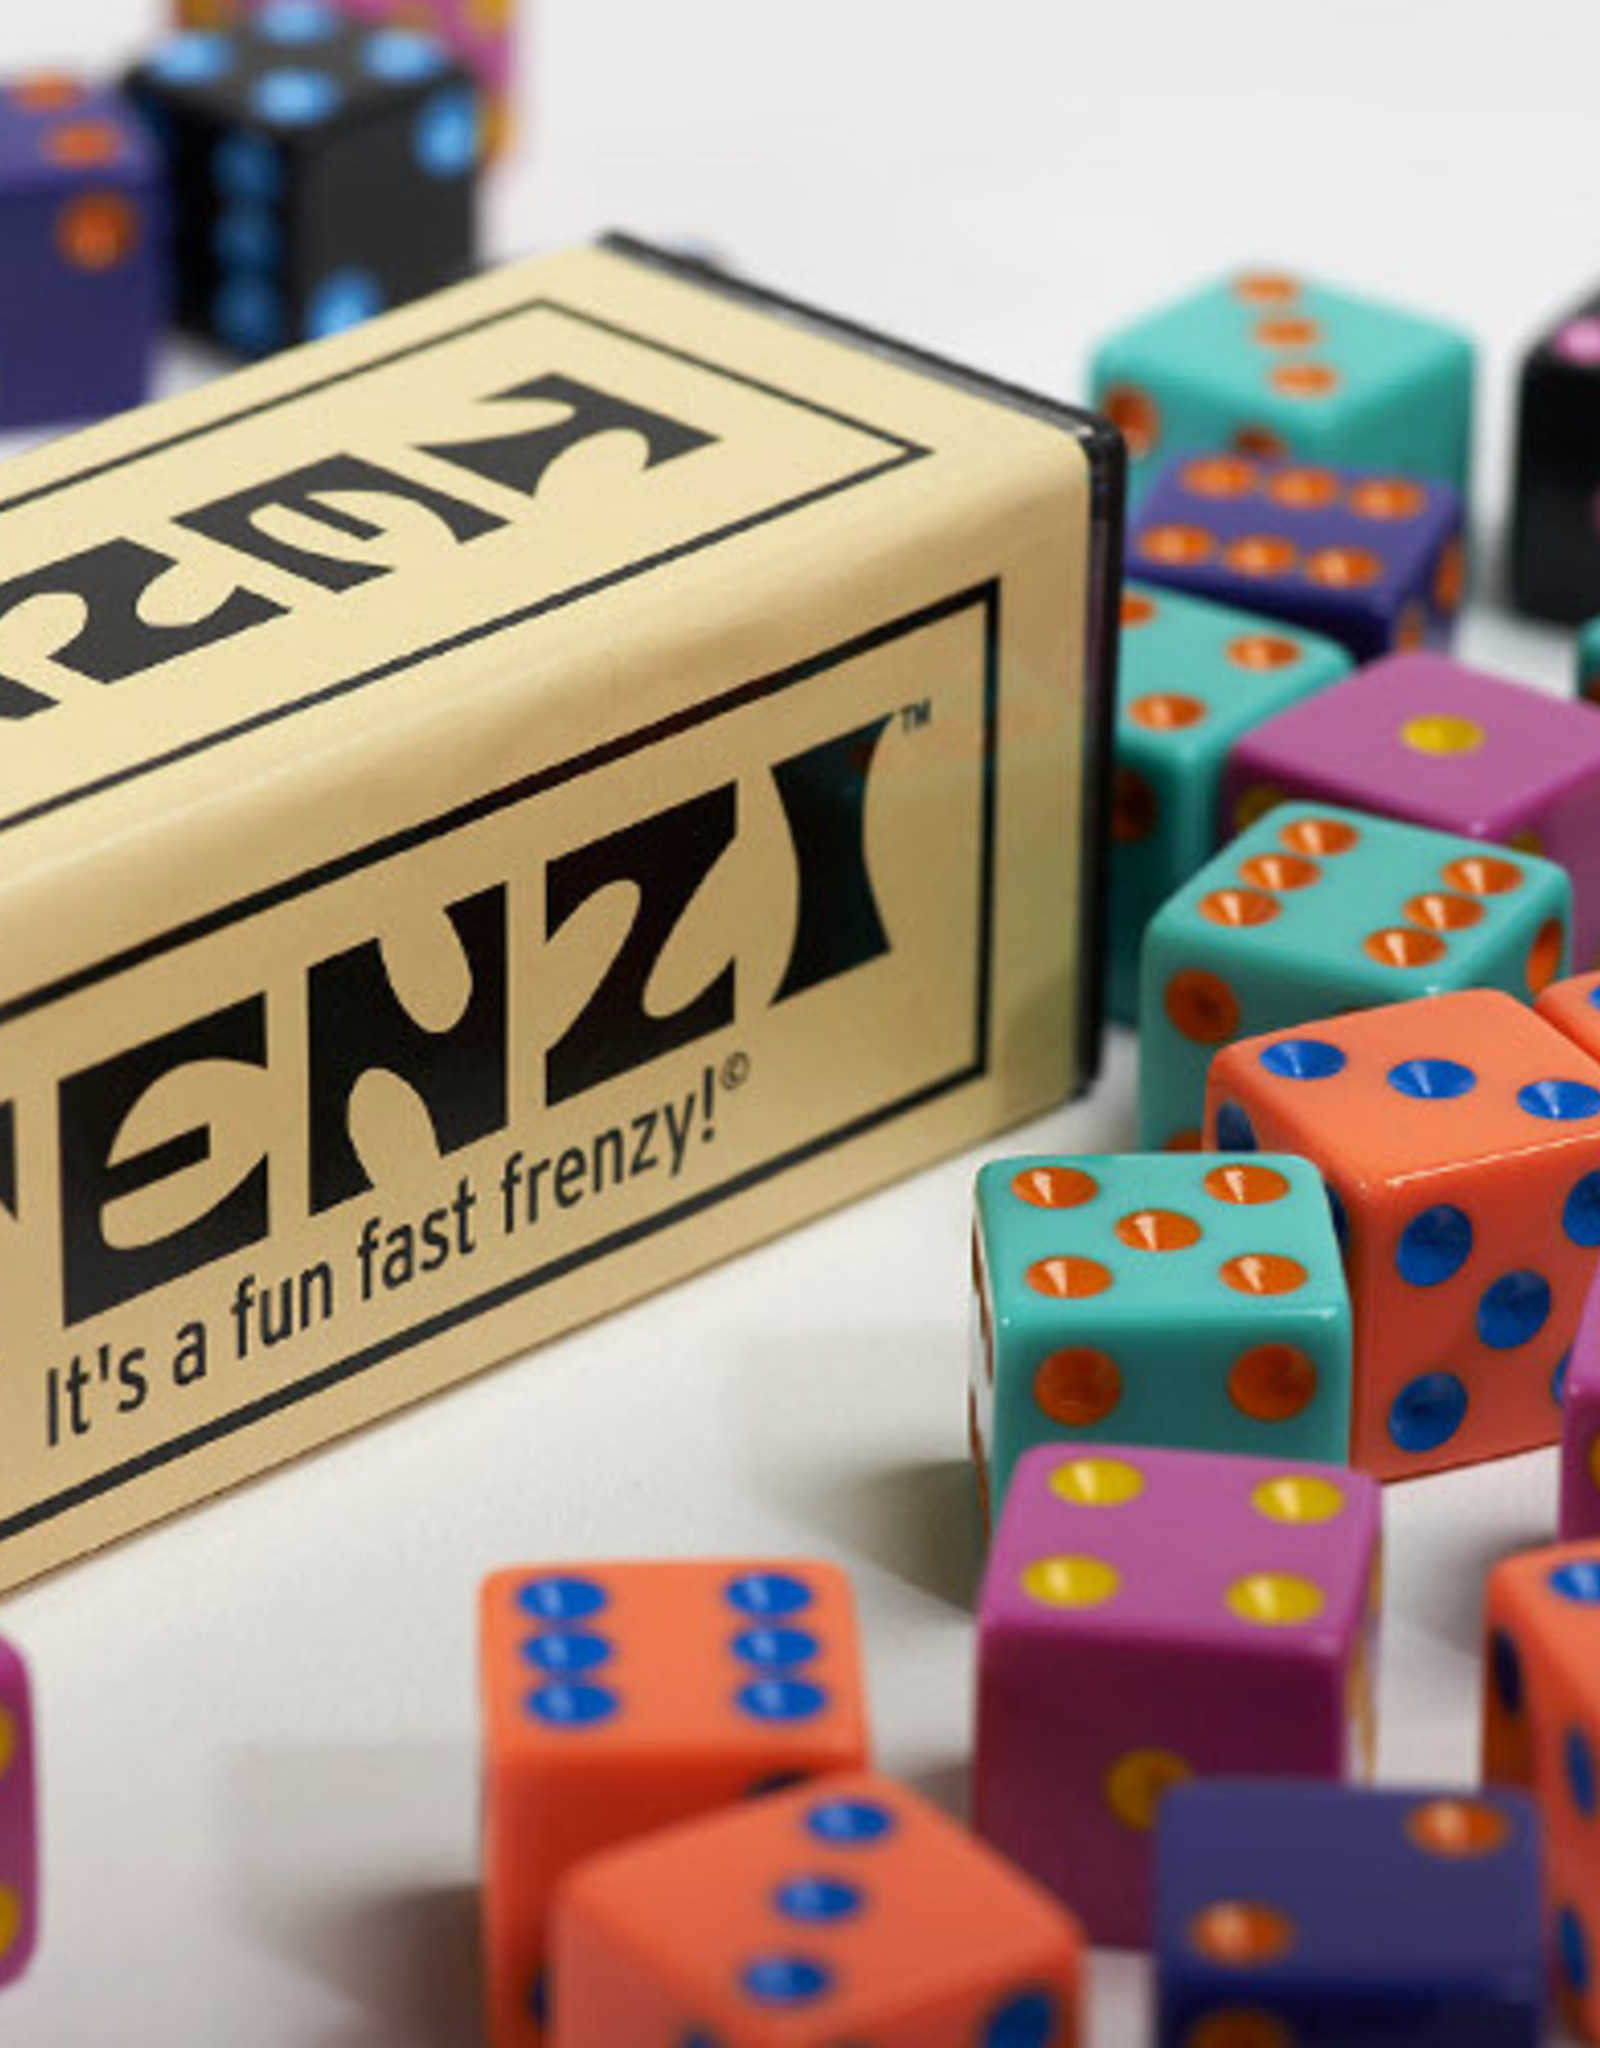 table cloth for tenzi dice game